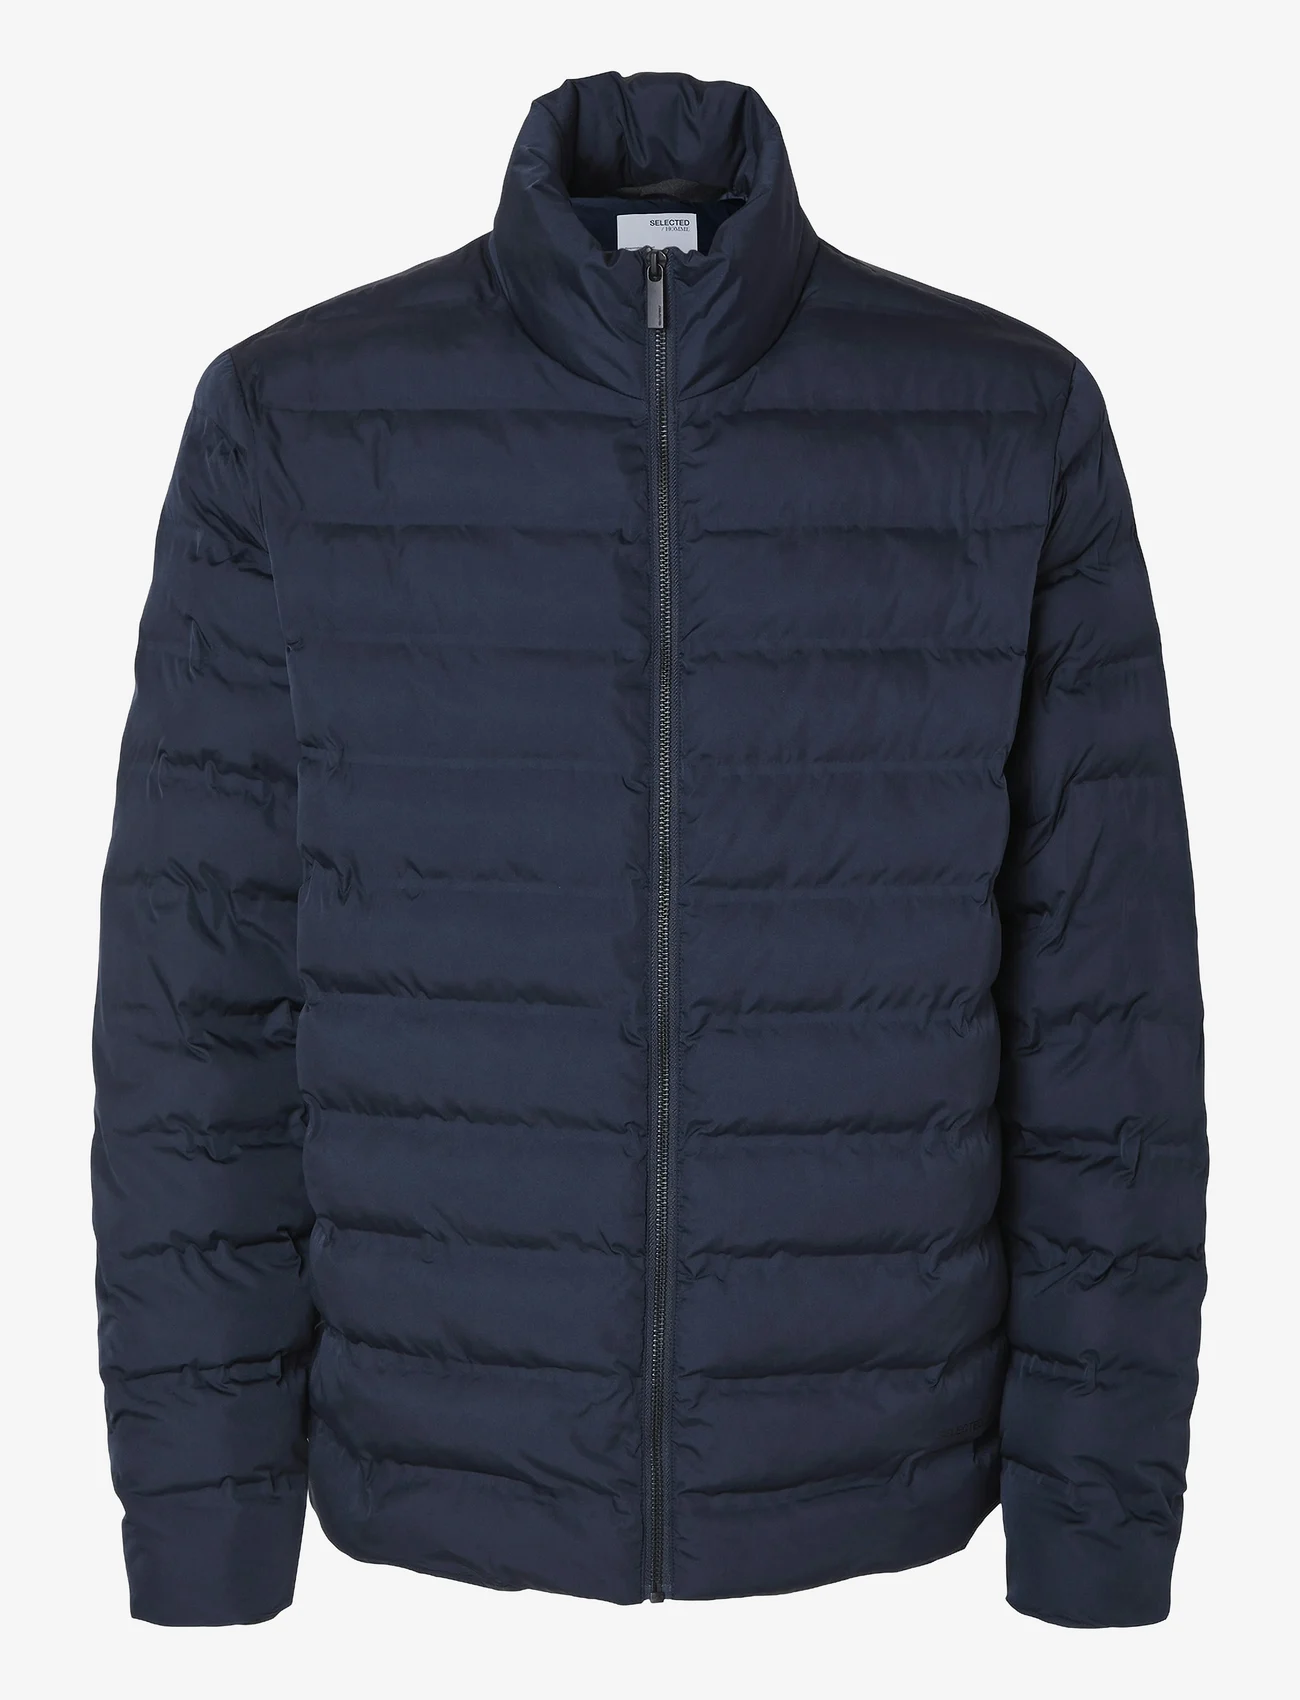 Selected Homme - SLHBARRY QUILTED JACKET NOOS - talvitakit - sky captain - 0